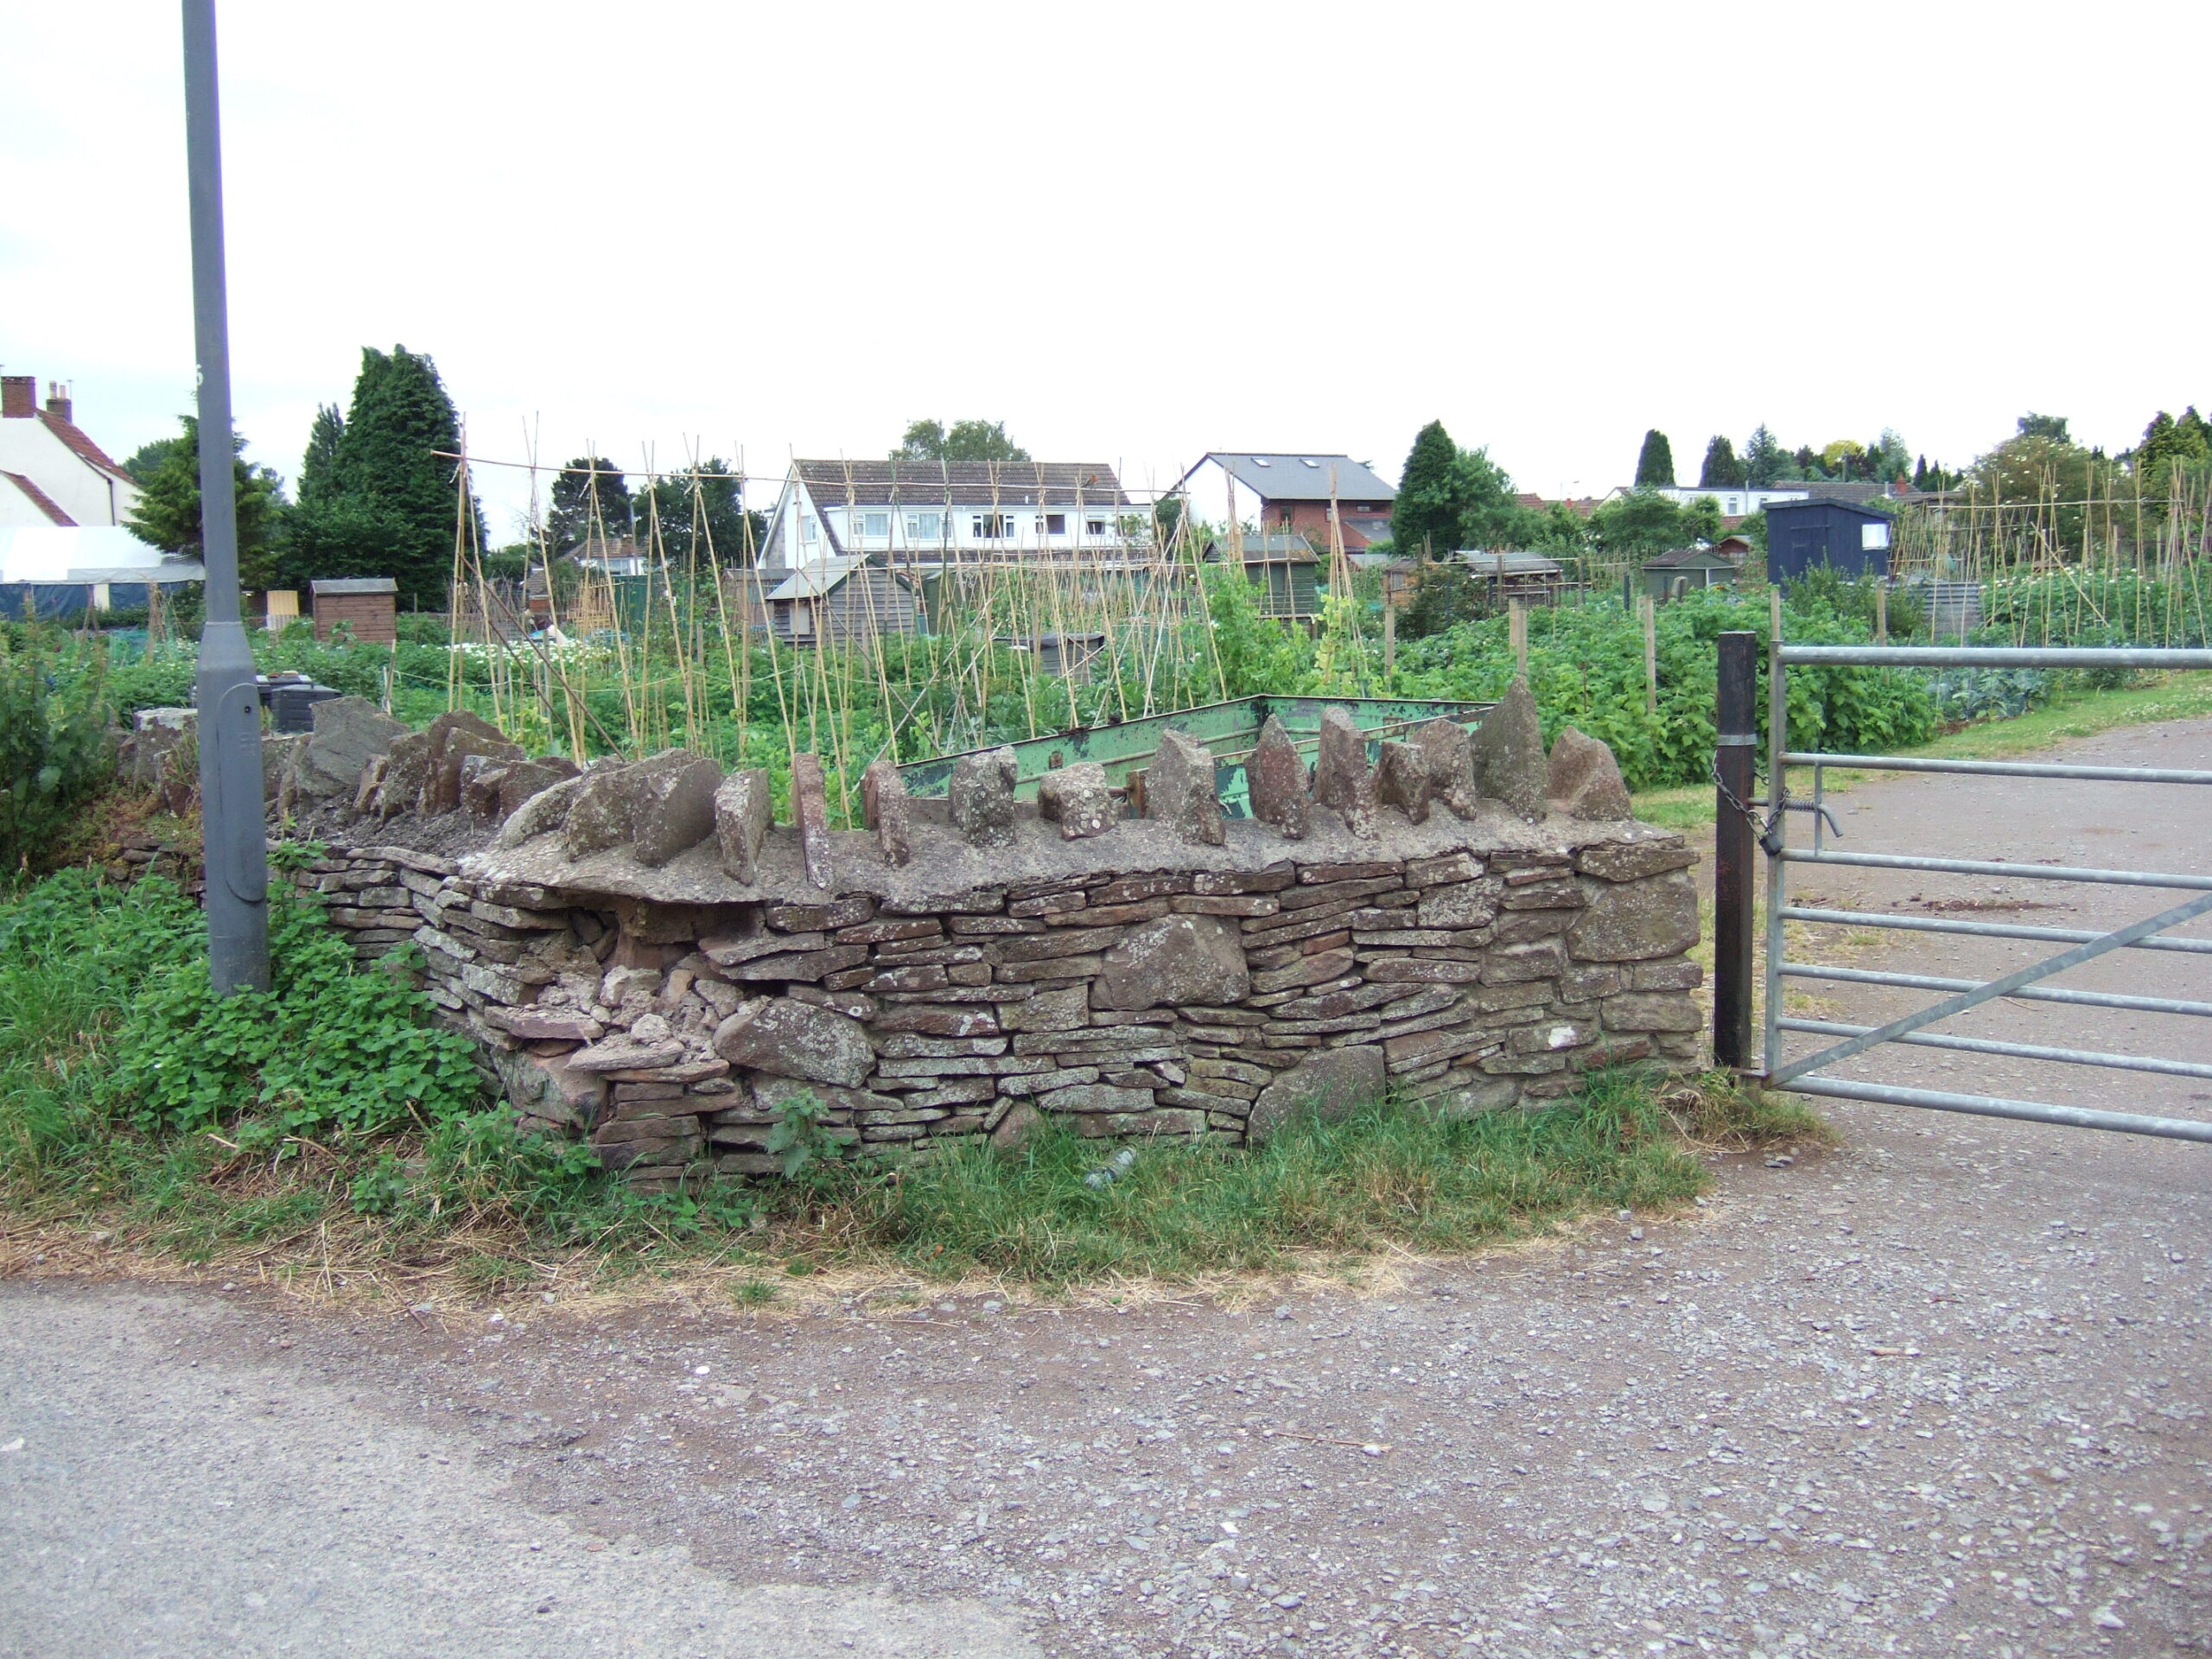 The access gate to Centenary Field on Mill Lane. A drystone wall and a large metal gate.